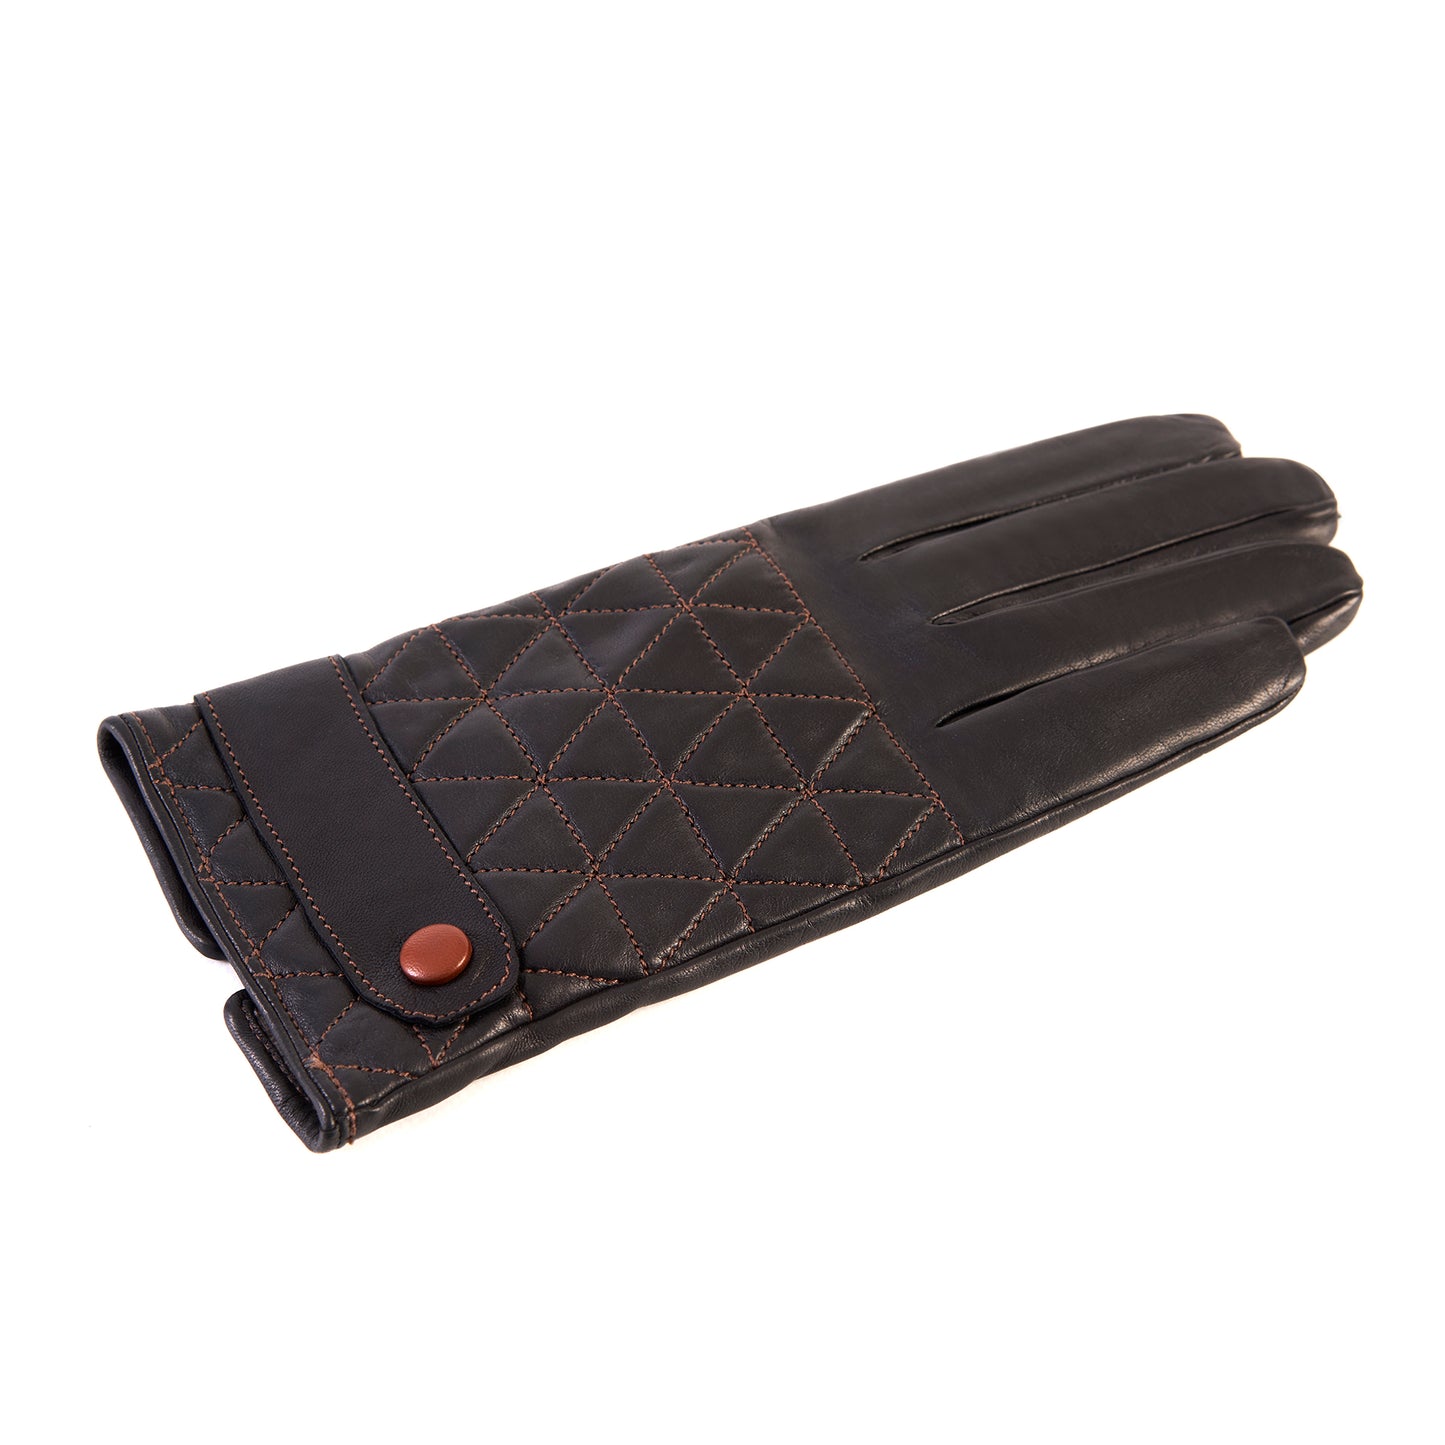 Men's dark brown quilted top sheepskin gloves with strap and contrast stitching details with cashmere lining